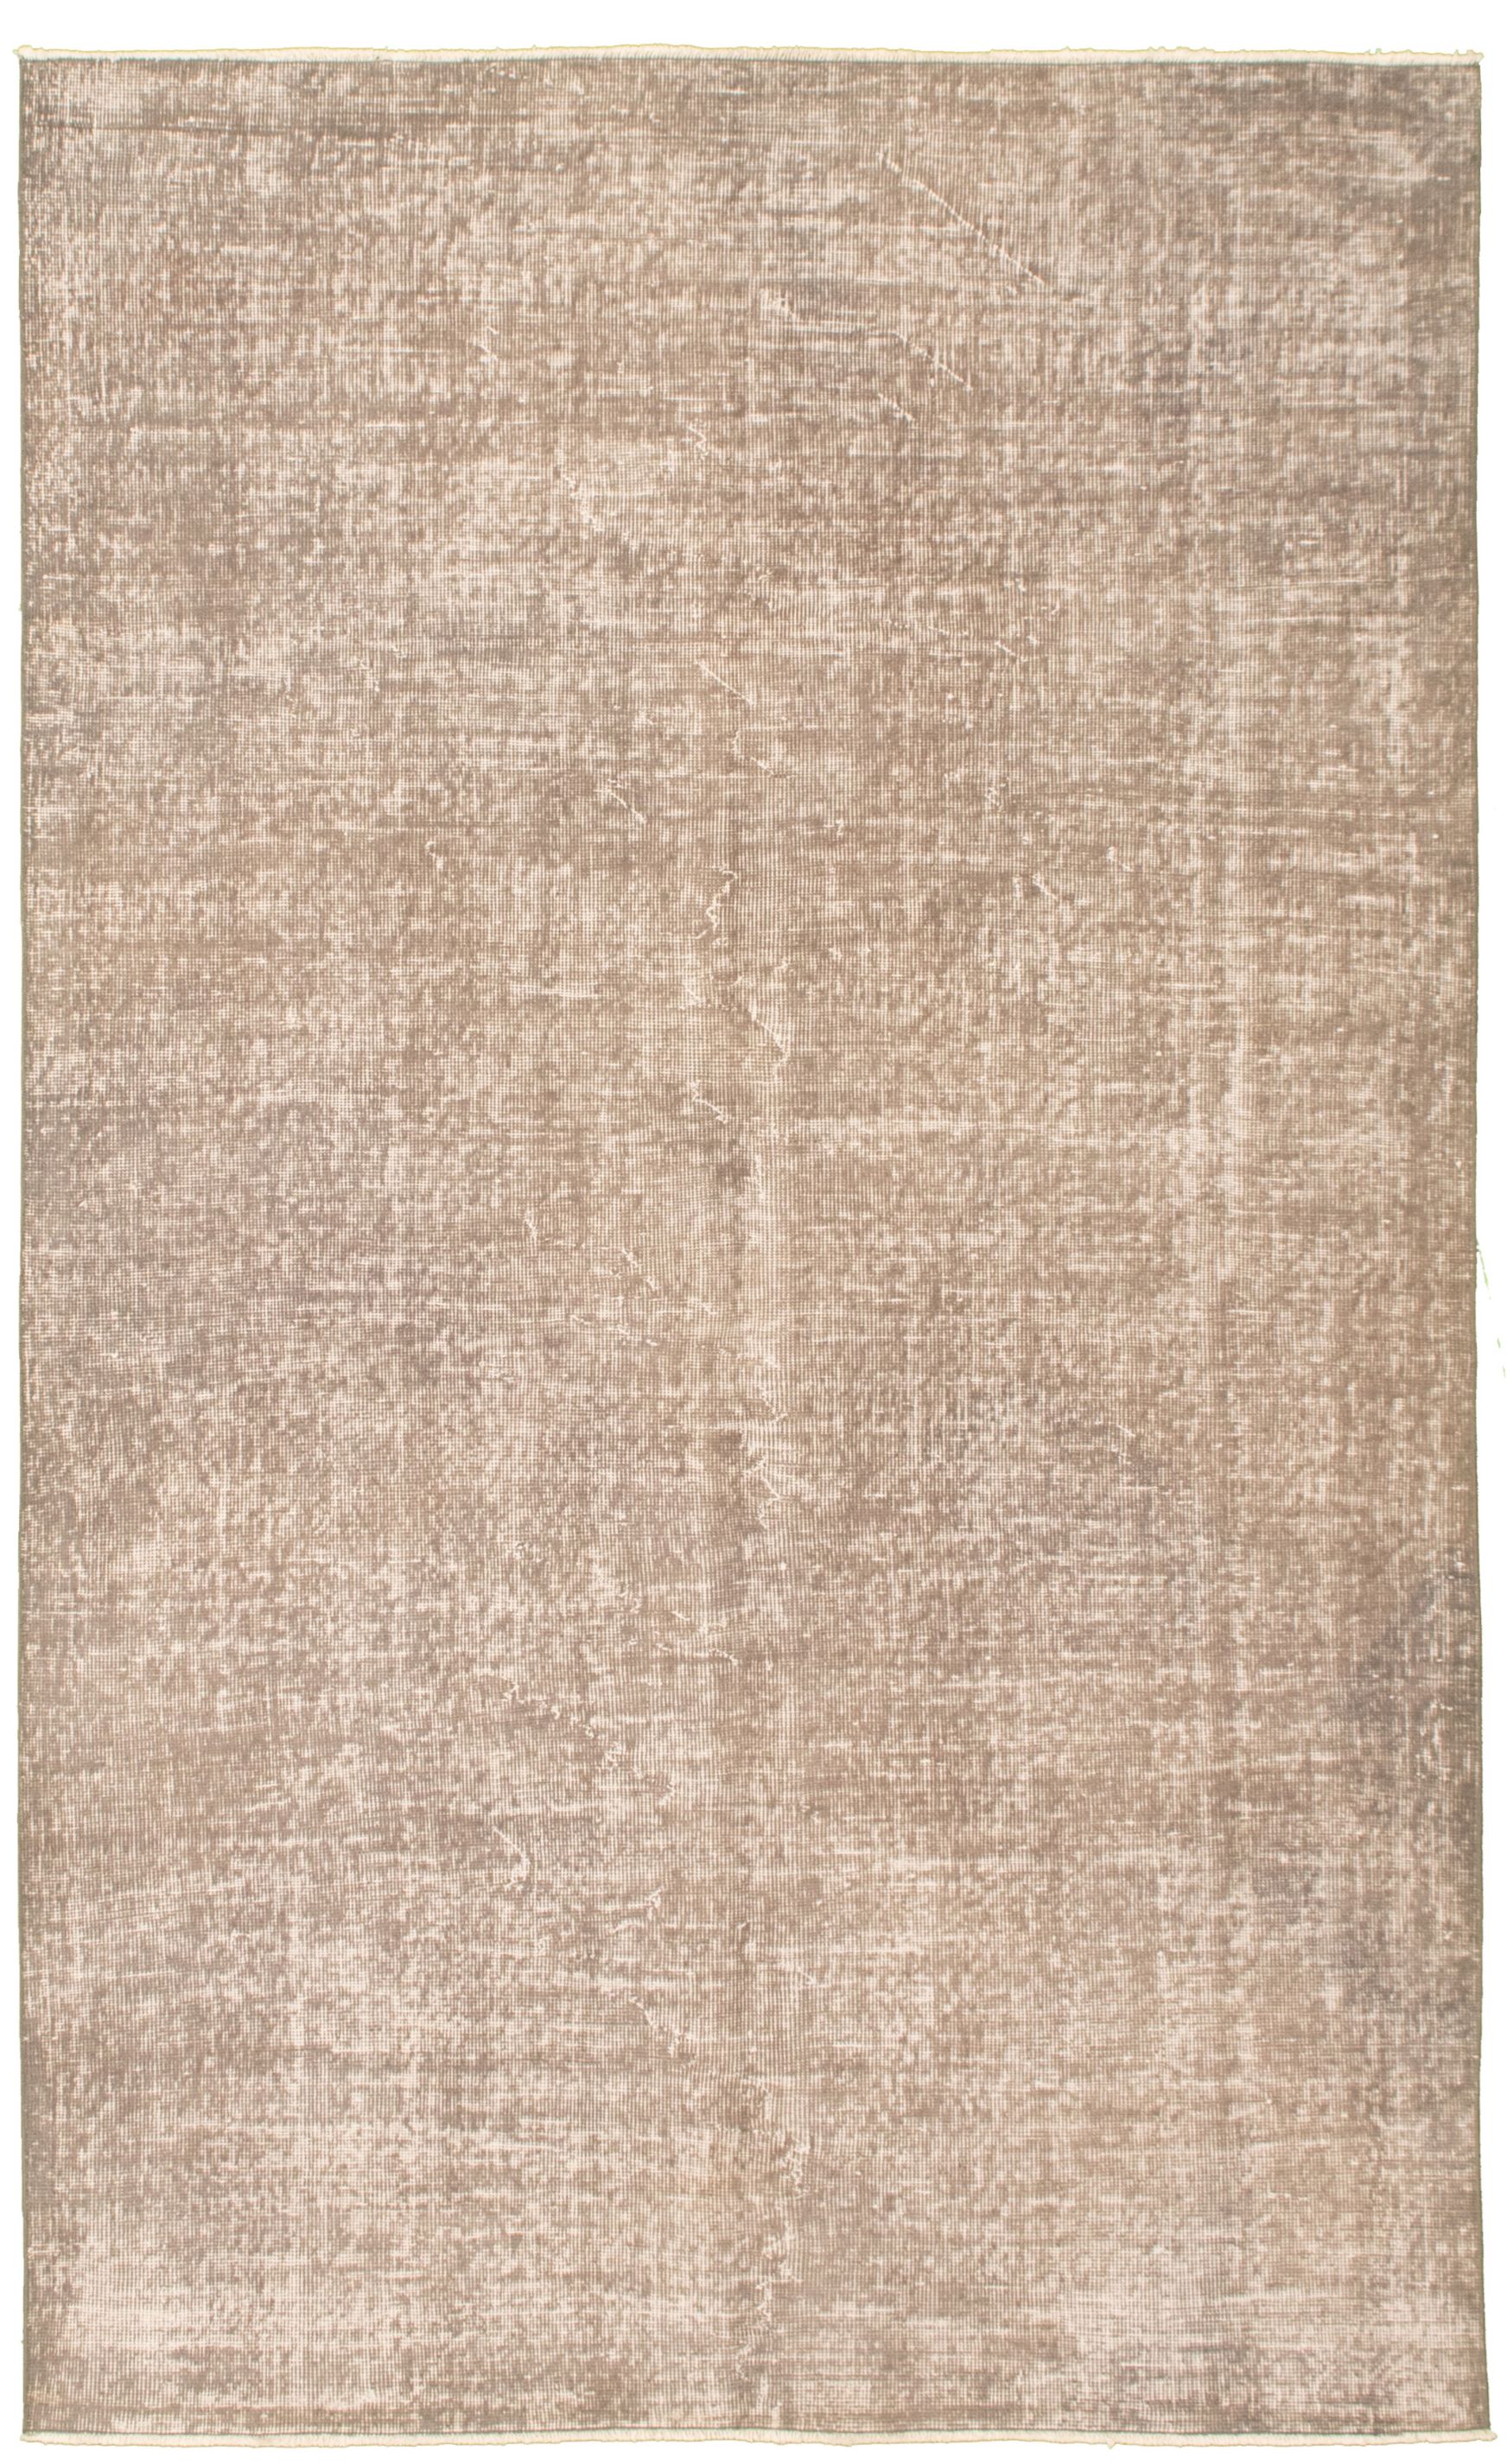 Hand-knotted Antalya Vintage Grey Wool Rug 4'10" x 8'4" Size: 4'10" x 8'4"  